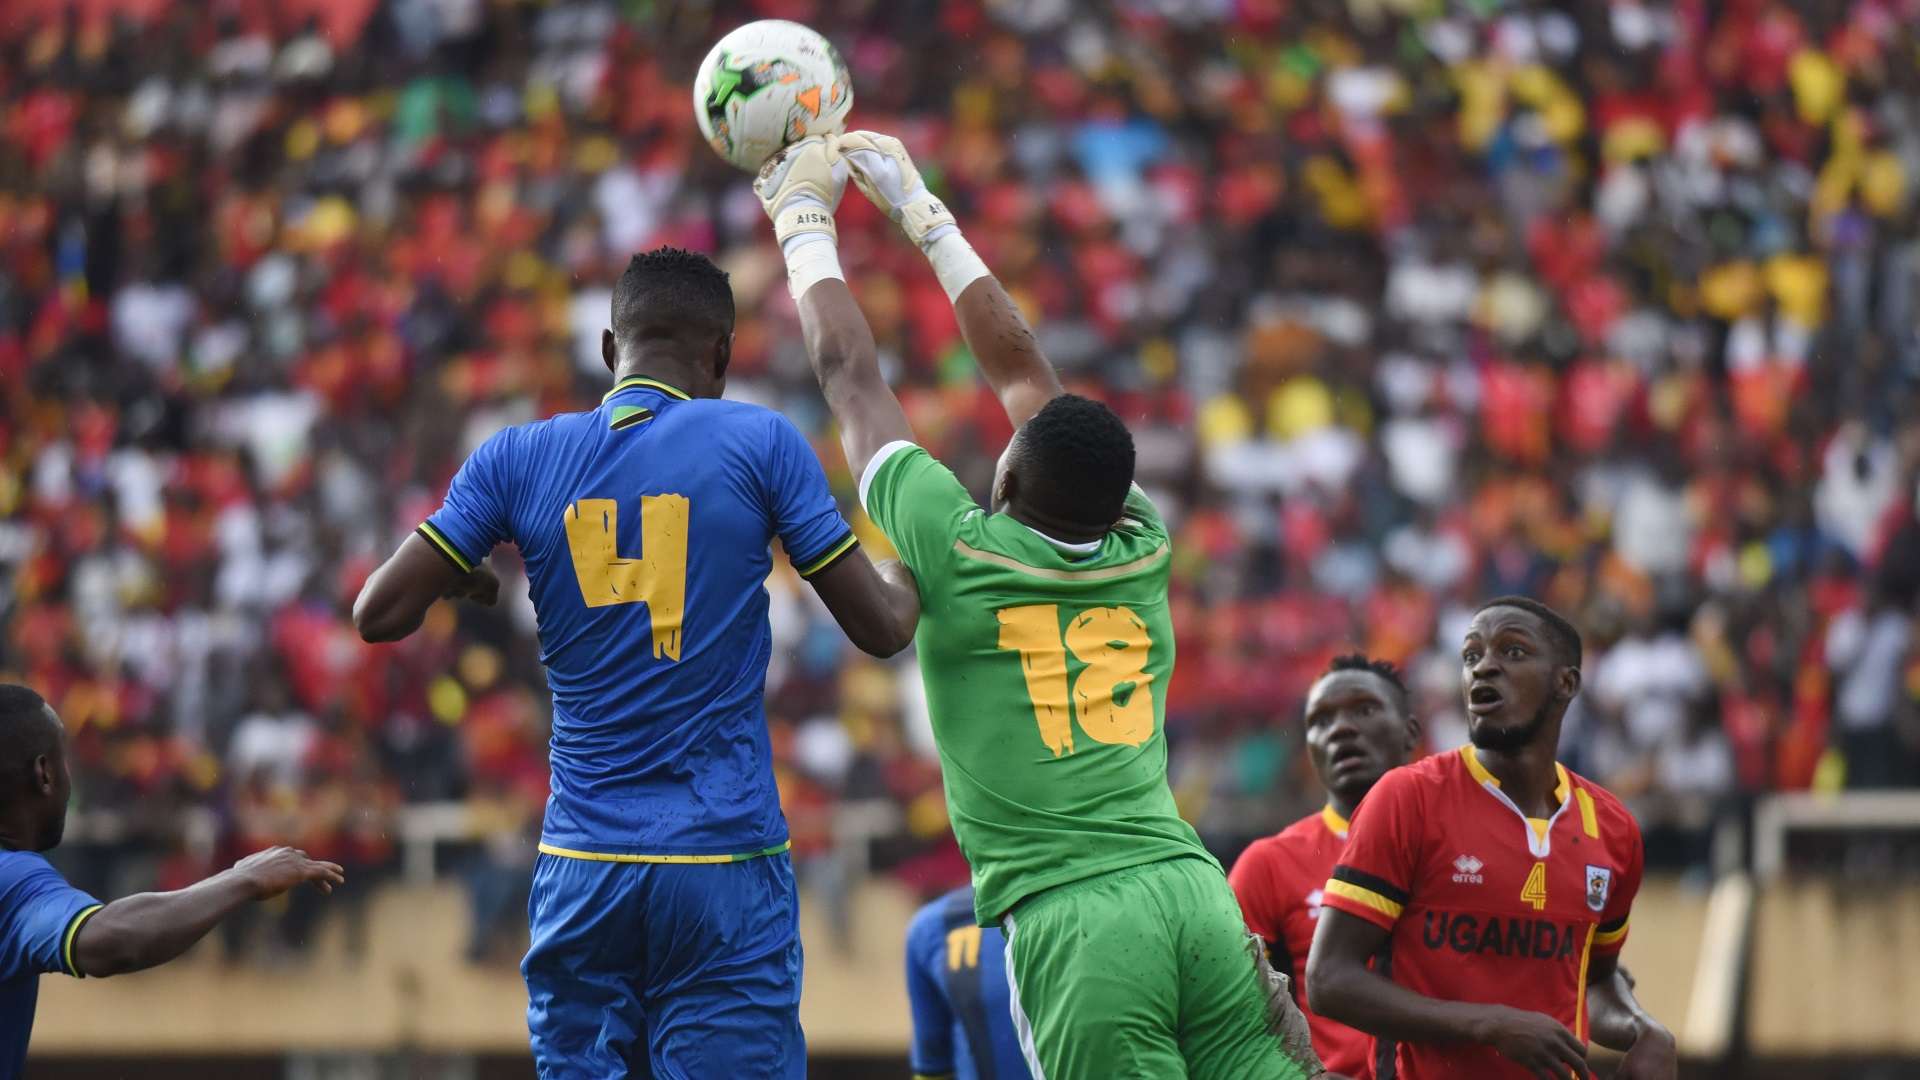 Aishi Salum Manula, Tanzania goalkeeper punches away the ball during the 2019 Afcon Qualifiers against Uganda